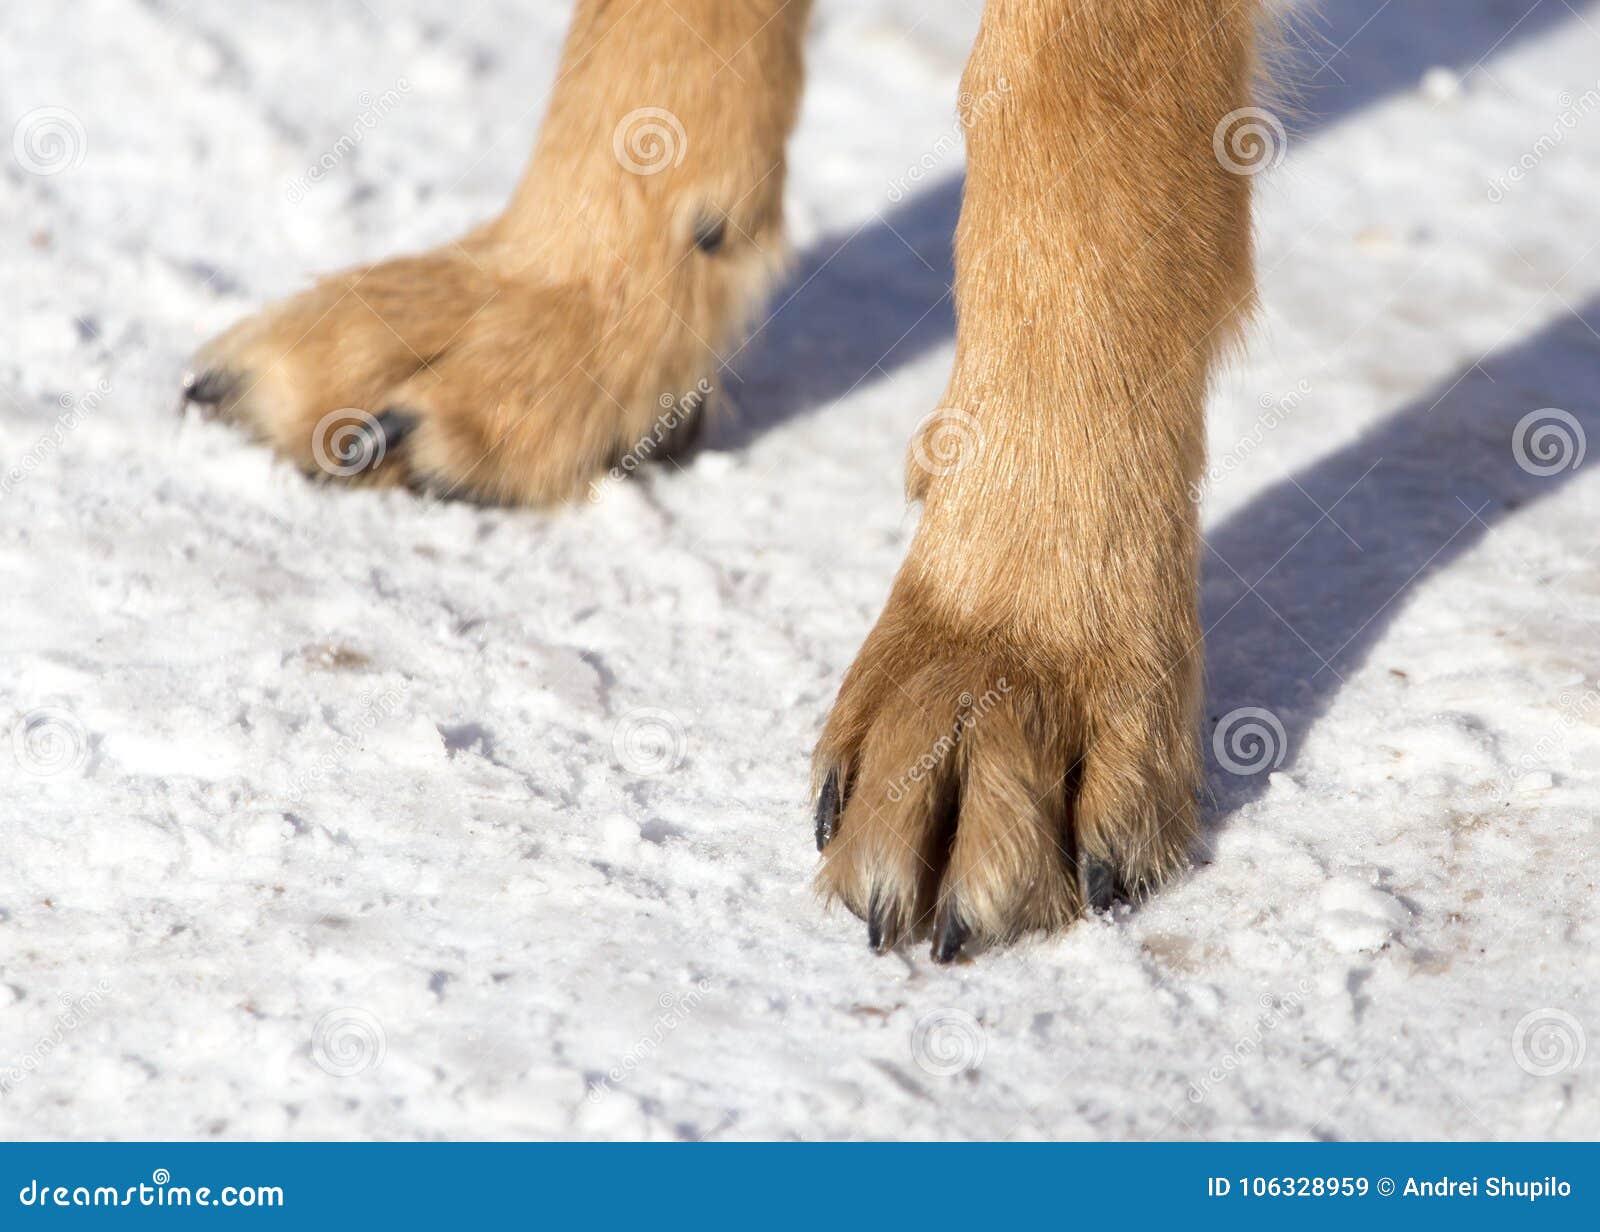 dog paws on nature in winter